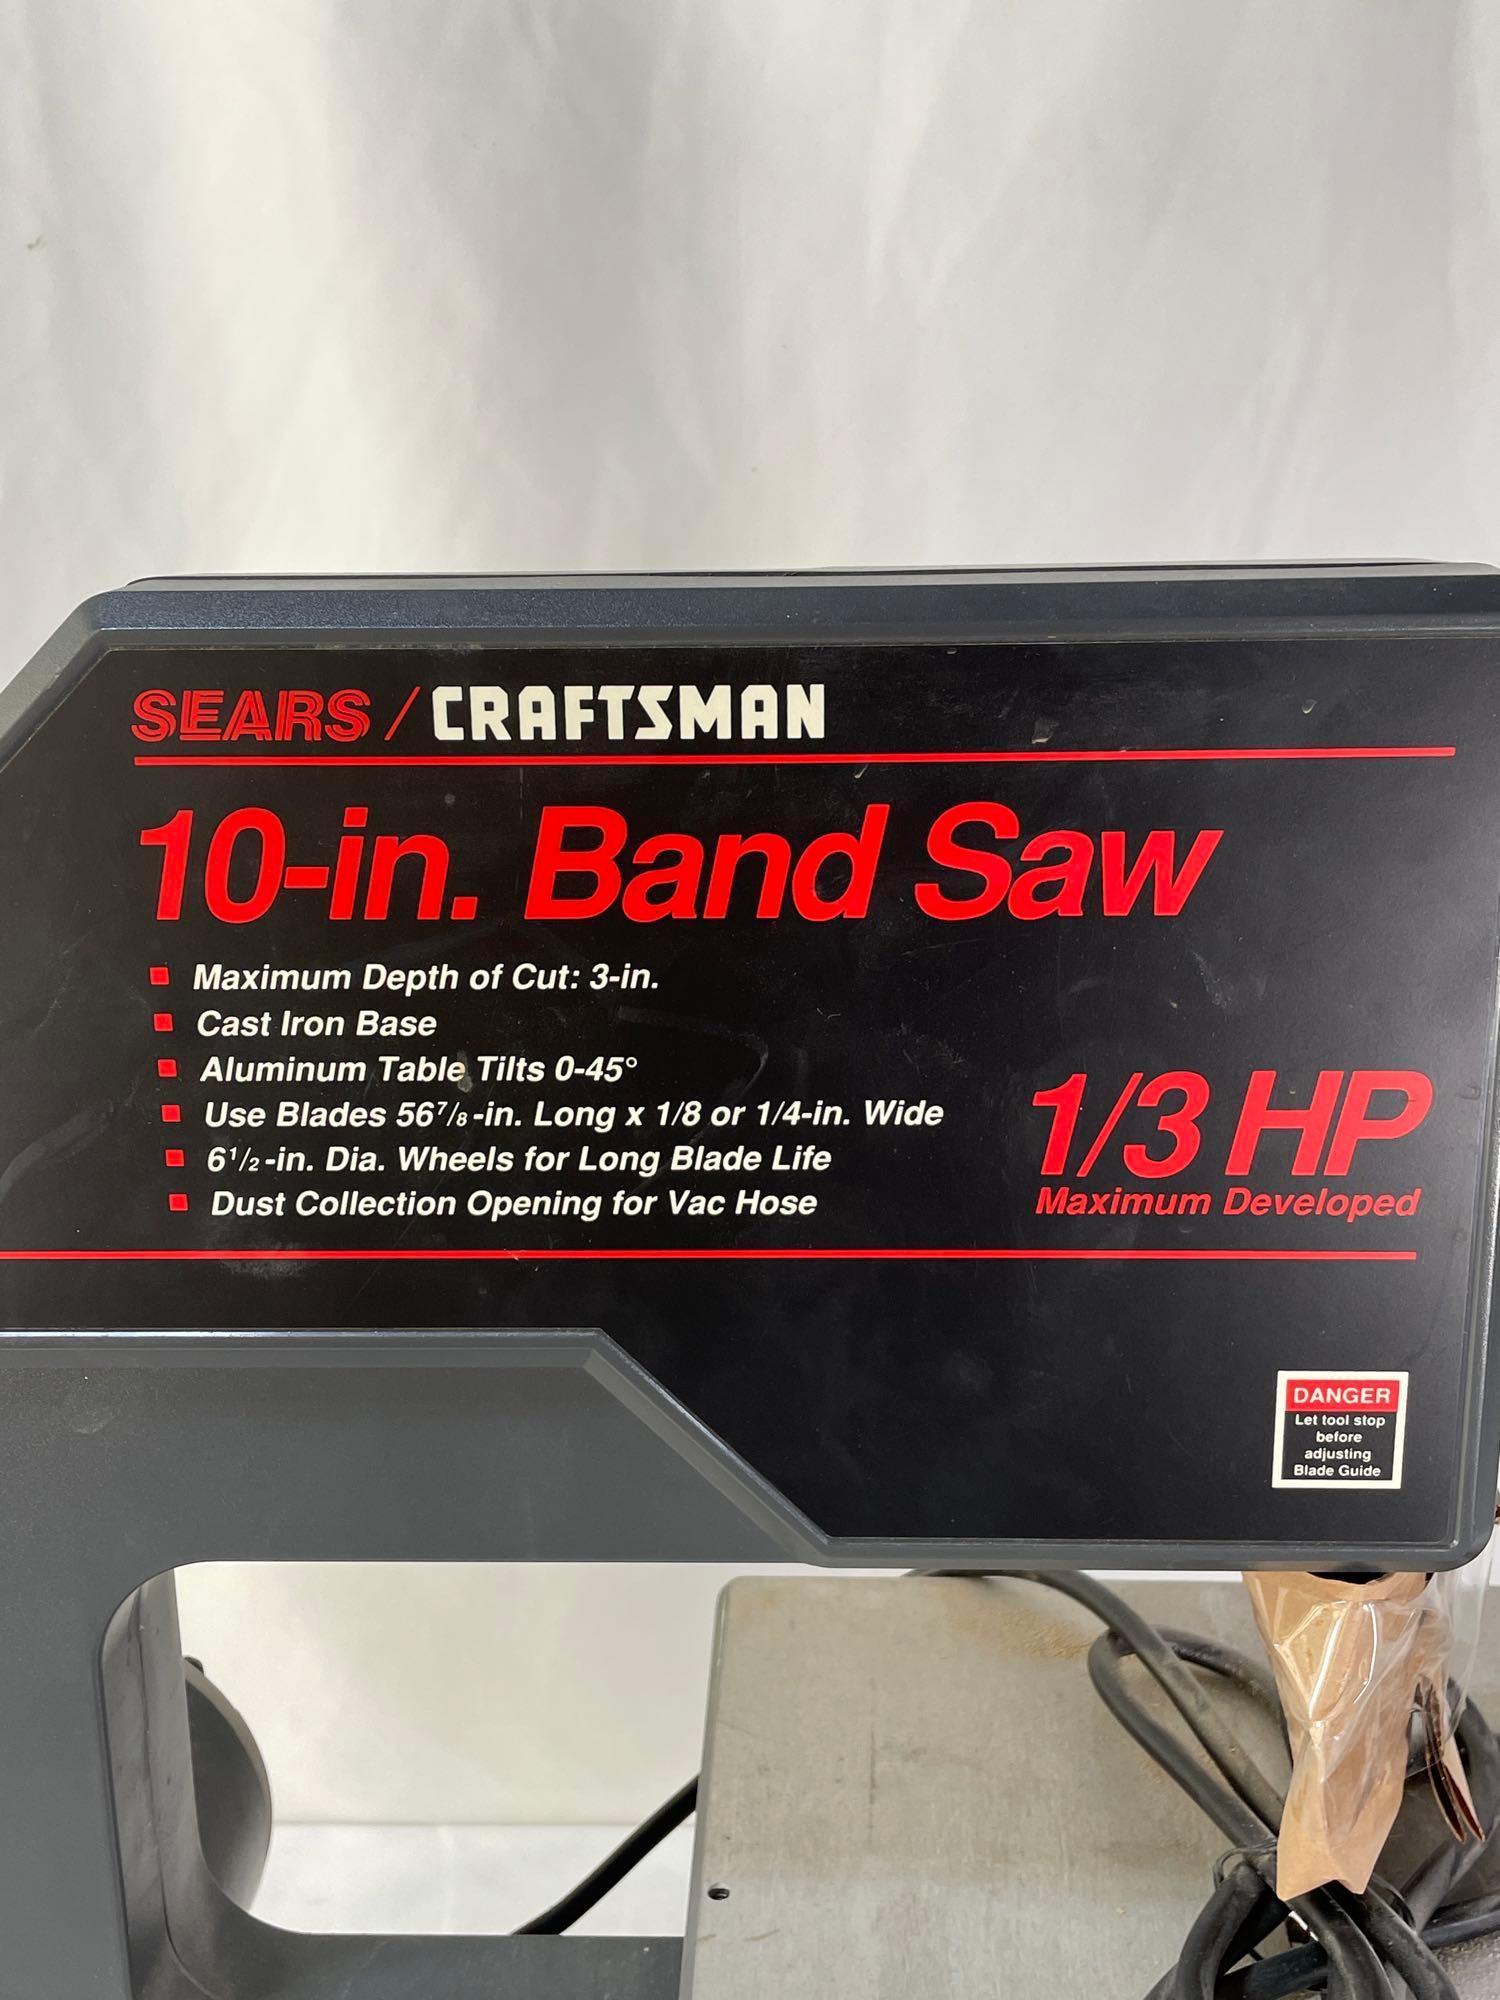 Craftsman 10" Band Saw with Manual